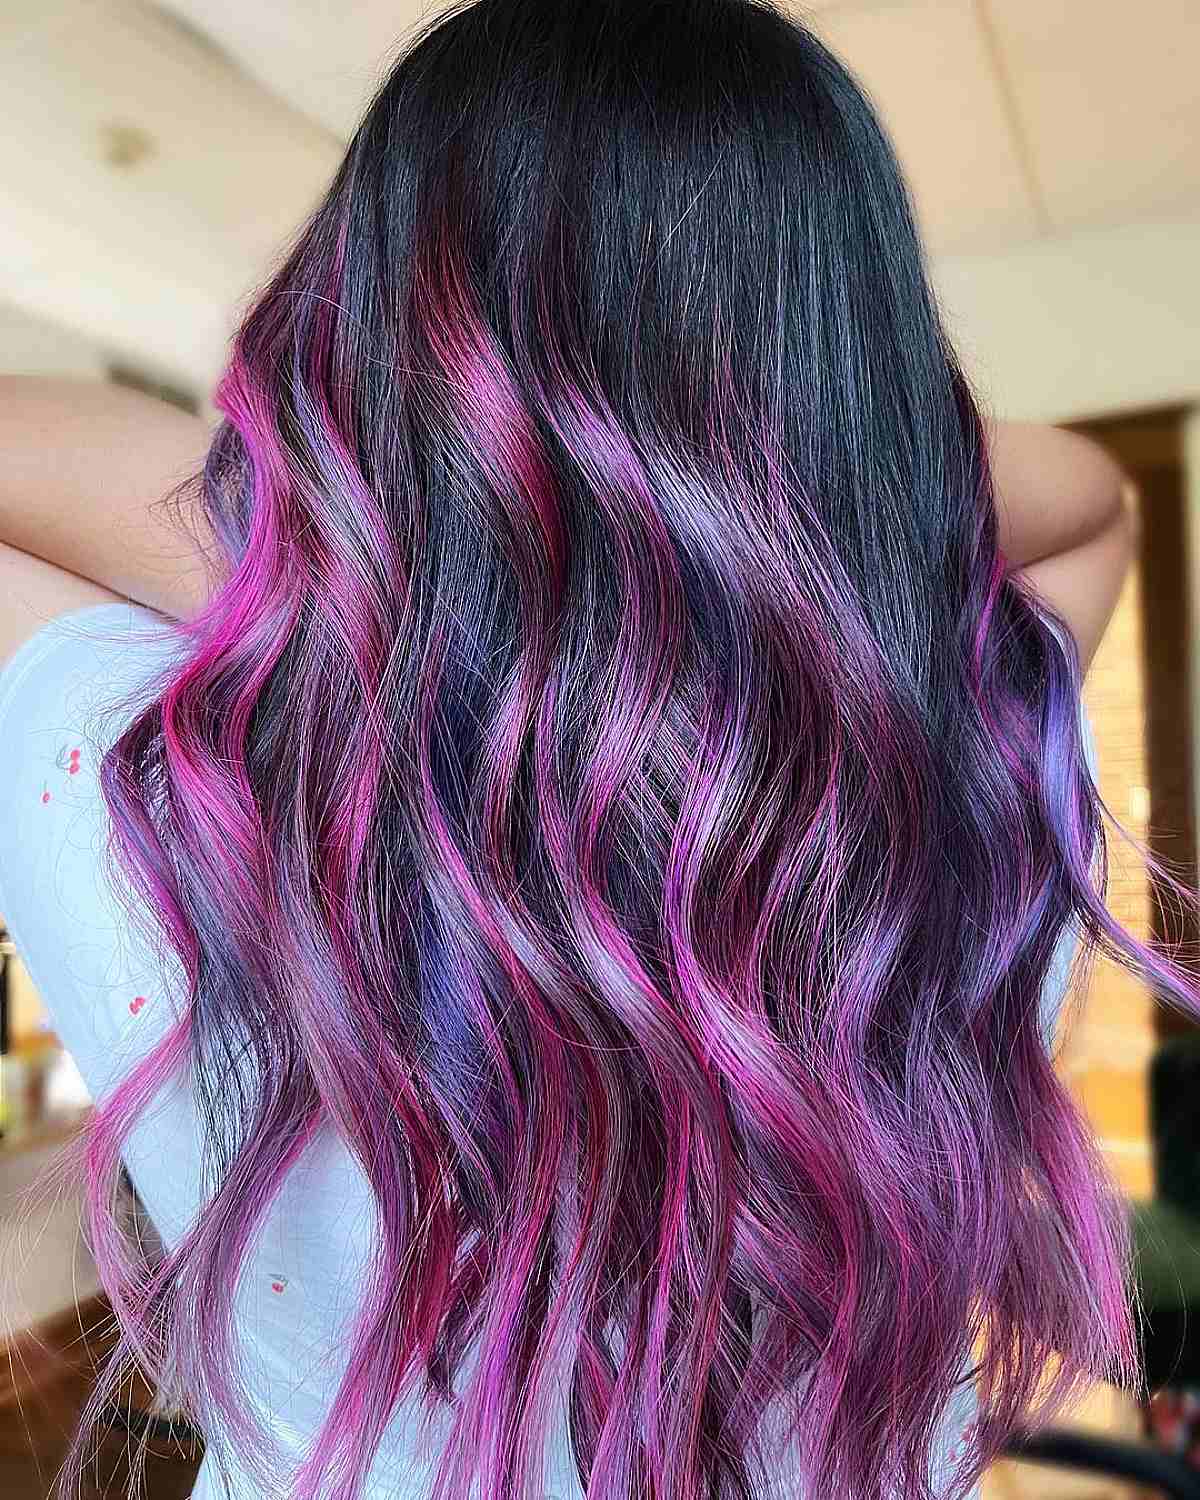 Black Hair Color with Pink and Violet Glaze for Winter